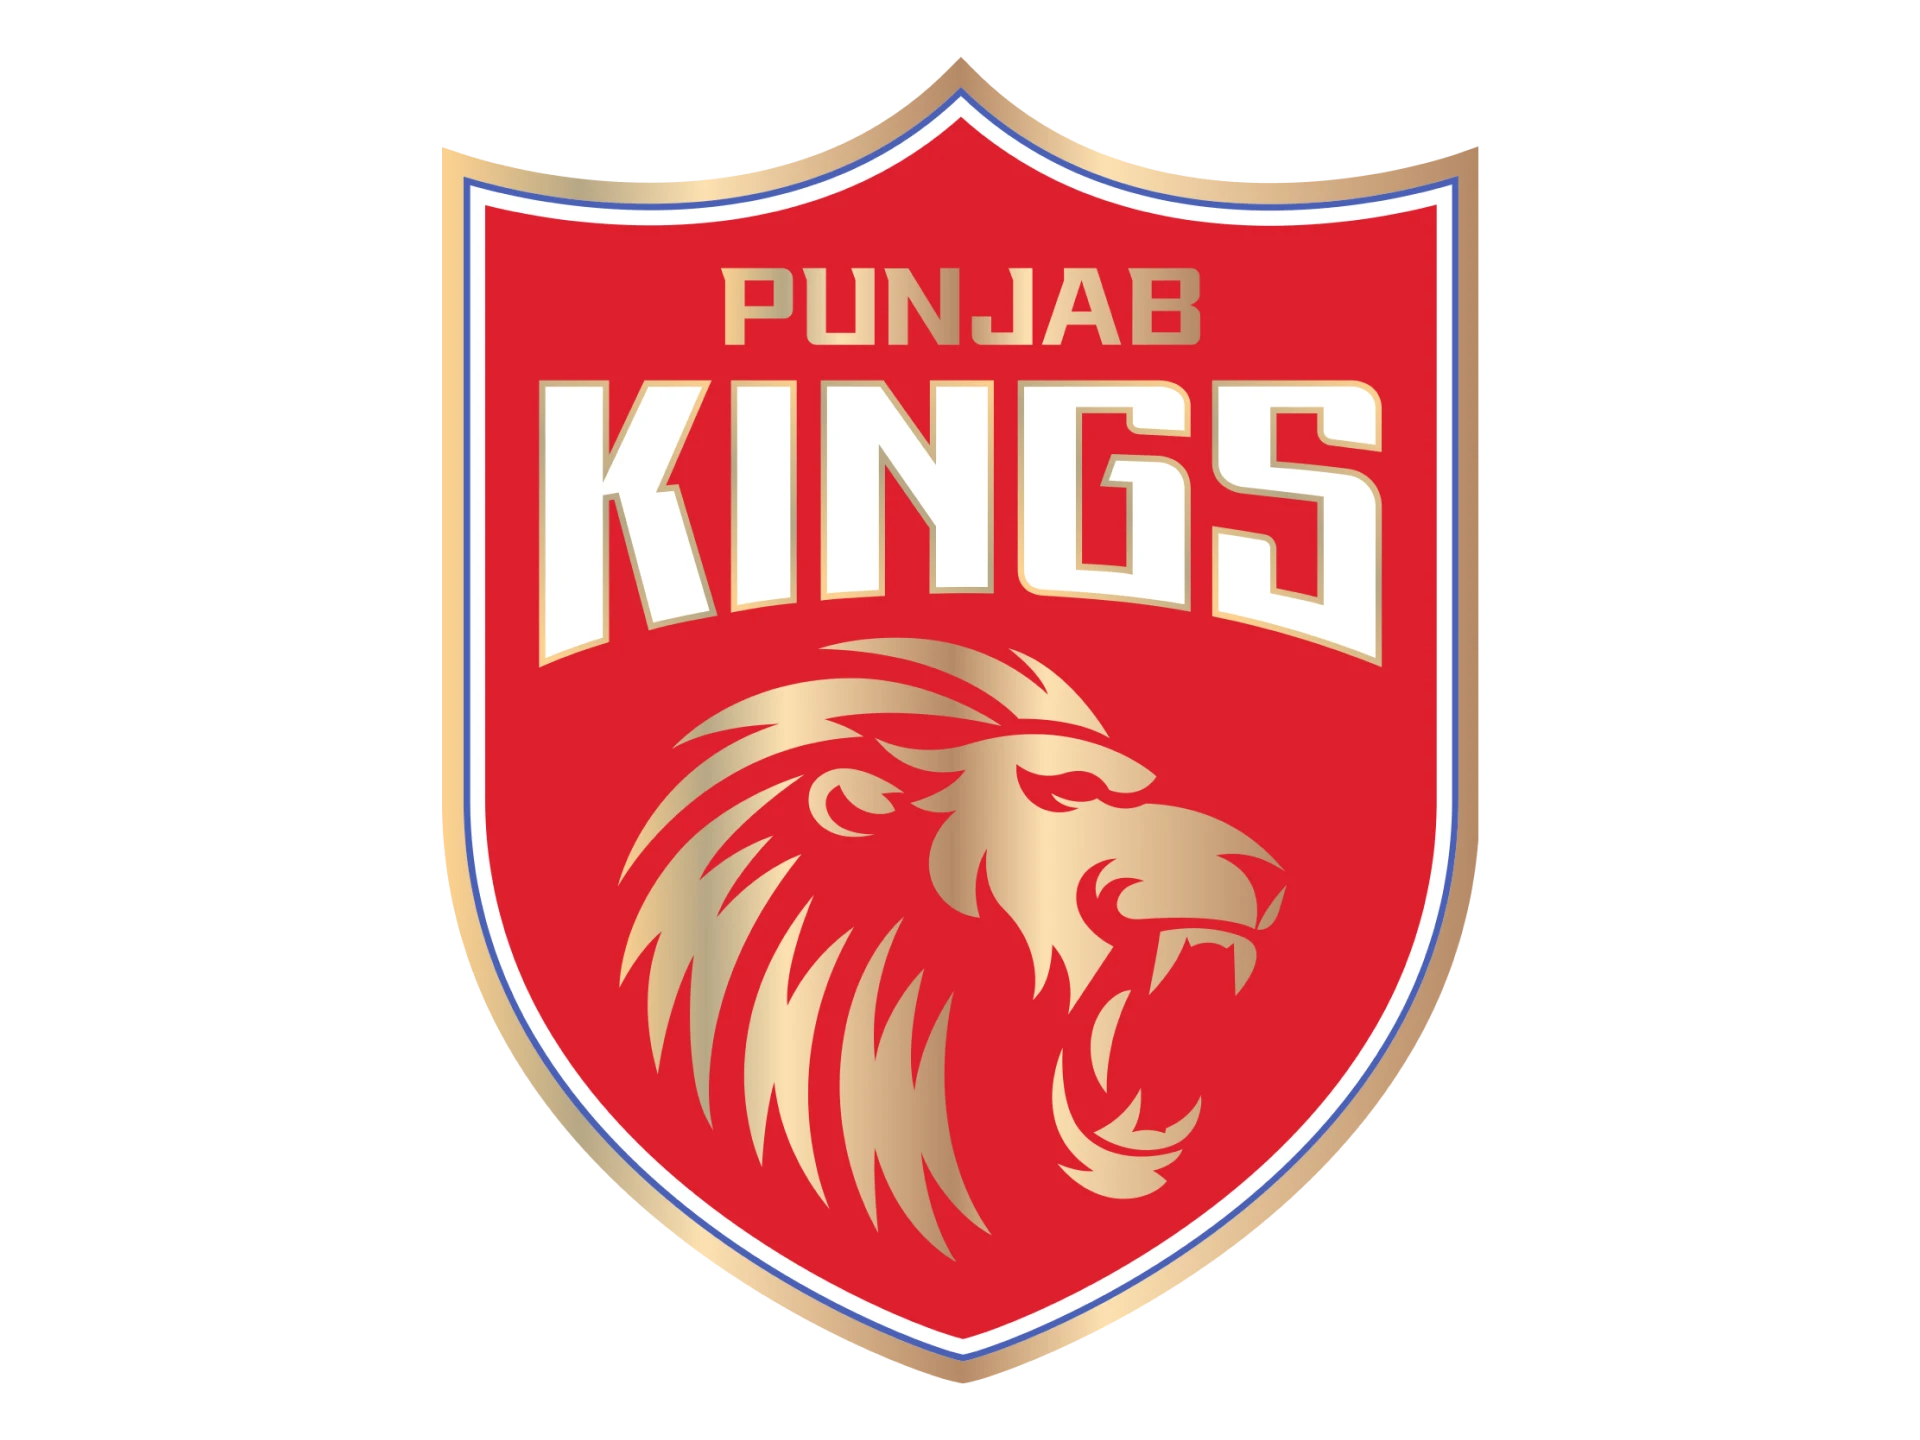 If you are a fan of the Punjab Kings IPL team, place a bet on them.